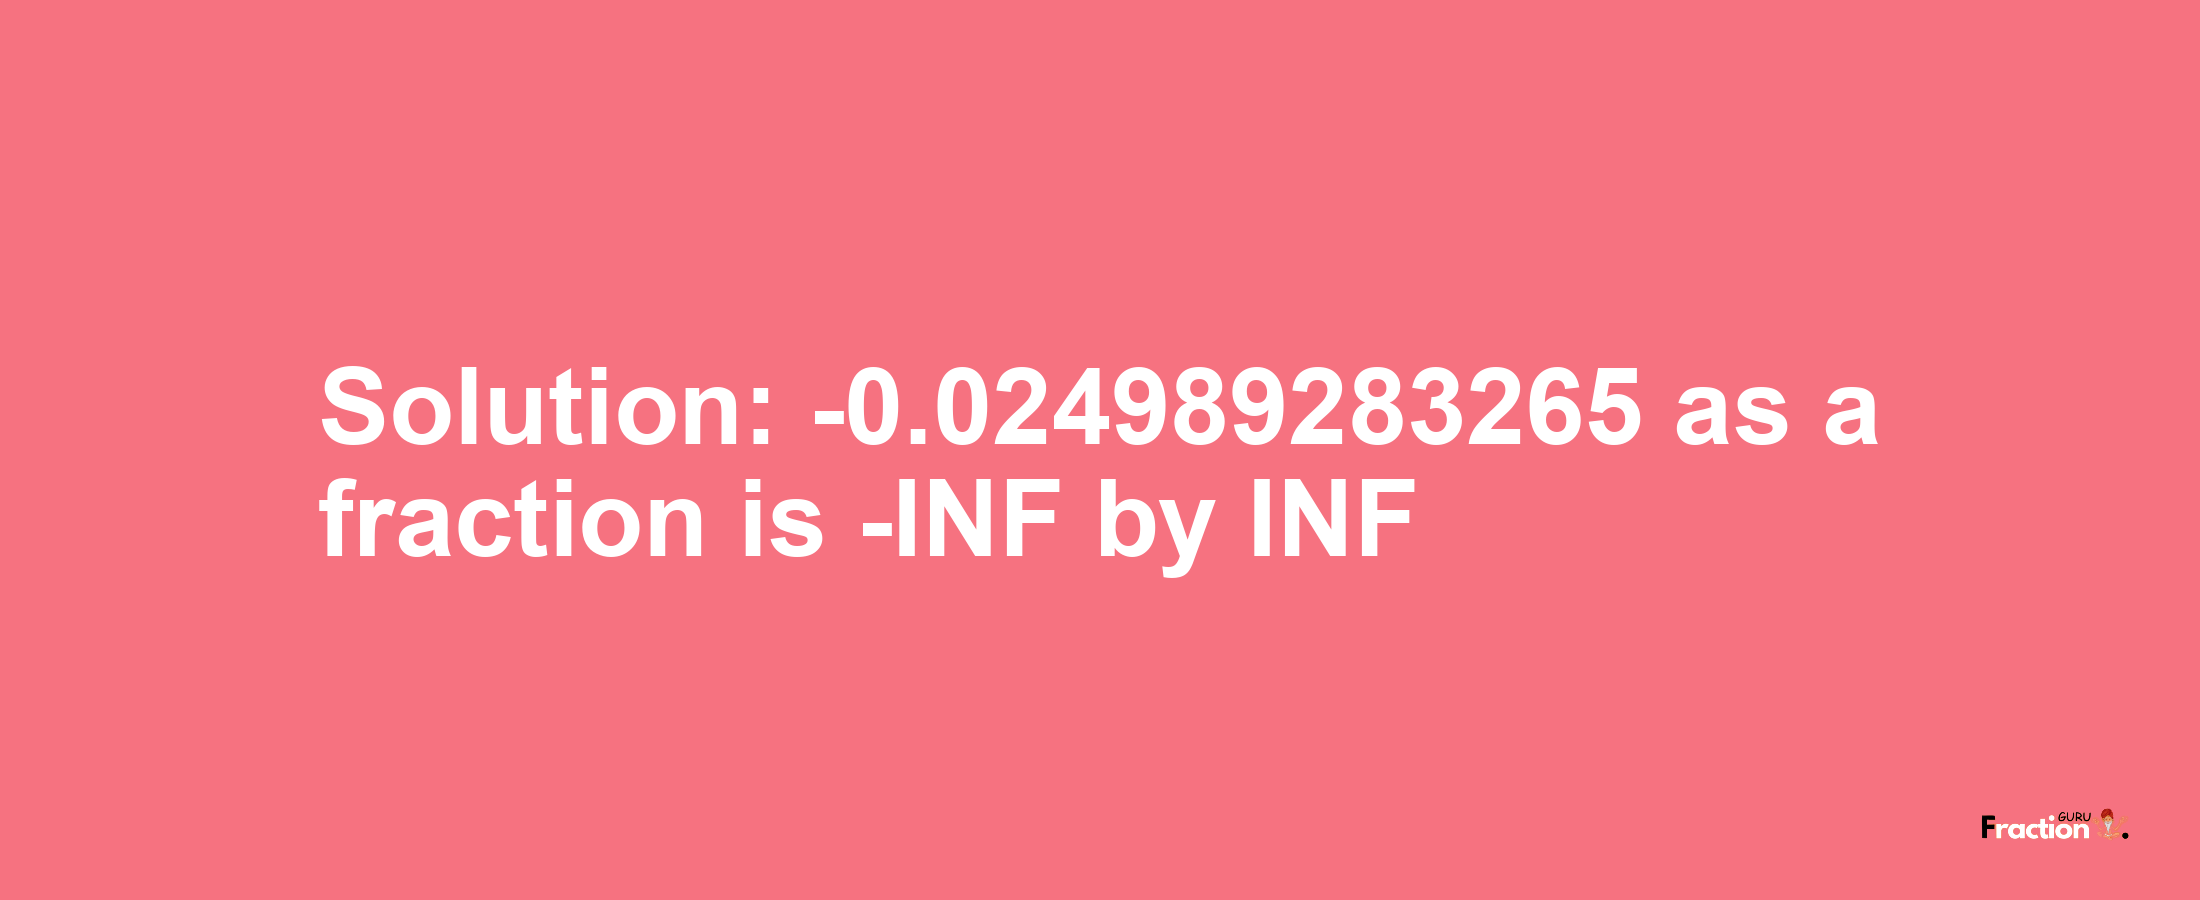 Solution:-0.024989283265 as a fraction is -INF/INF